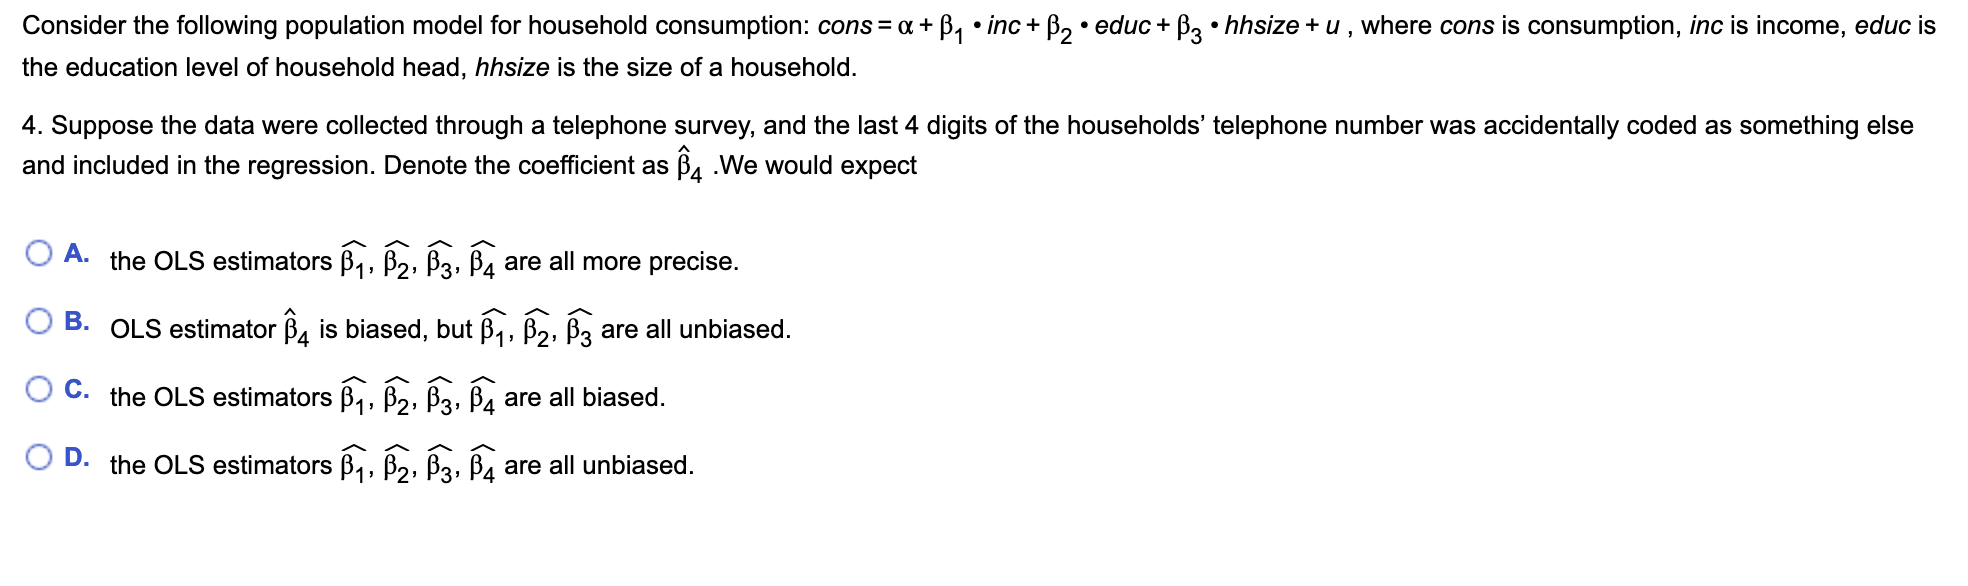 Consider the following population model for household consumption: cons = a + B, • inc+ B, • educ + B3 • hhsize + u, where cons is consumption, inc is income, educ is
the education level of household head, hhsize is the size of a household.
4. Suppose the data were collected through a telephone survey, and the last 4 digits of the households' telephone number was accidentally coded as something else
and included in the regression. Denote the coefficient as Ba .We would expect
O A.
the OLS estimators B,, B2, B3, B4 are all more precise.
B. OLS estimator B, is biased, but B,, B2, Bz are all unbiased.
O C. the OLS estimators B,, B2, B3, B4 are all biased.
O D. the OLS estimators B,, B2, B3, B4 are all unbiased.
